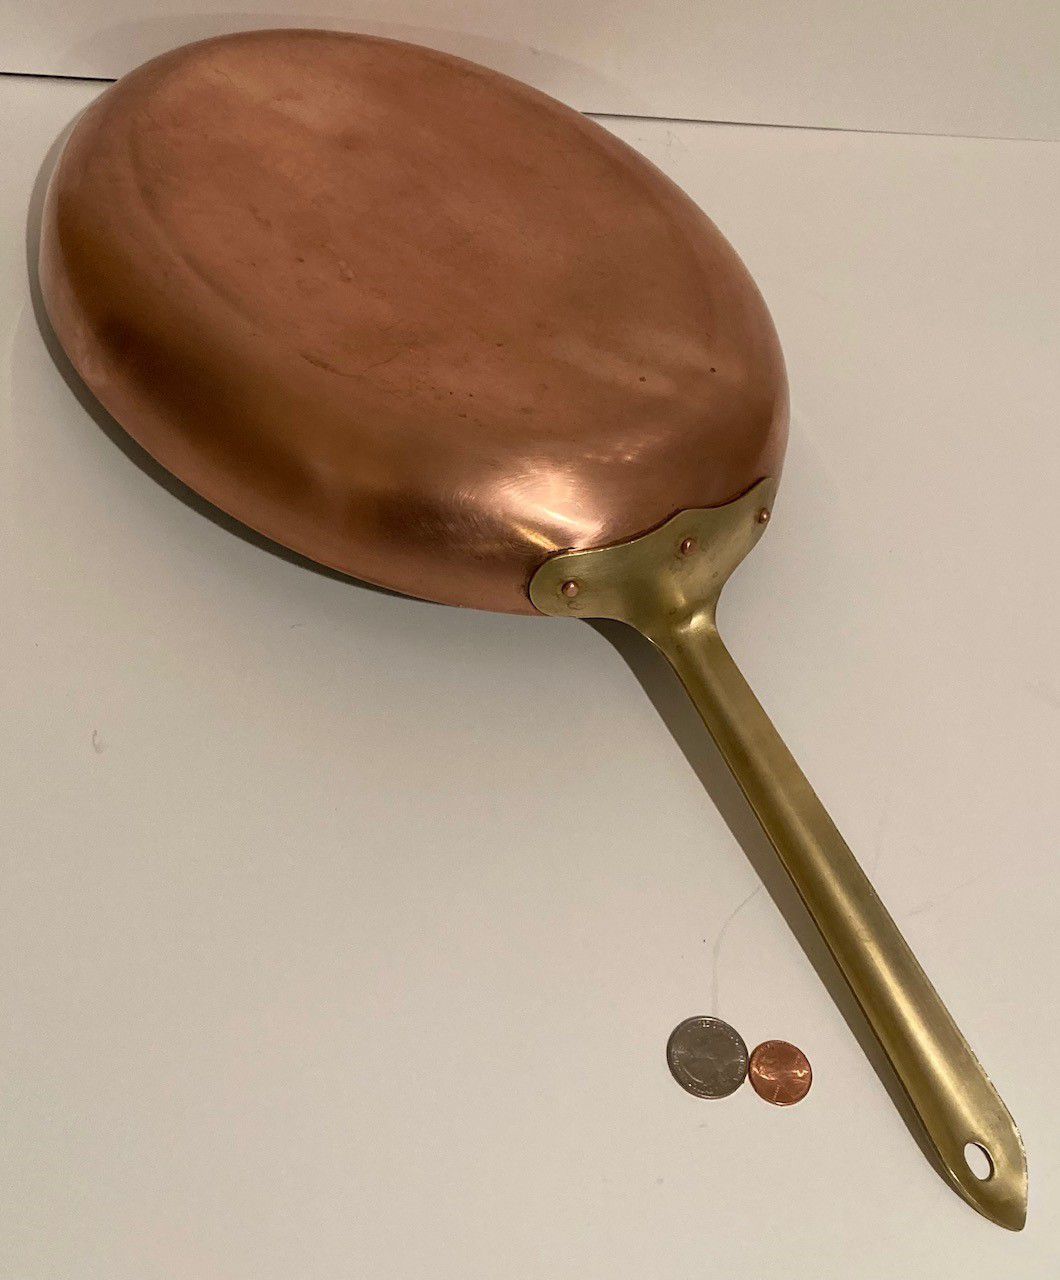 Vintage Copper and Brass Fish Frying Pan, Sauce Pan, 21" Long and 13" x 9 1/2" Pan Size, Quality, a Few Dings, Summer Design, Fish Pan, Cooking Pan